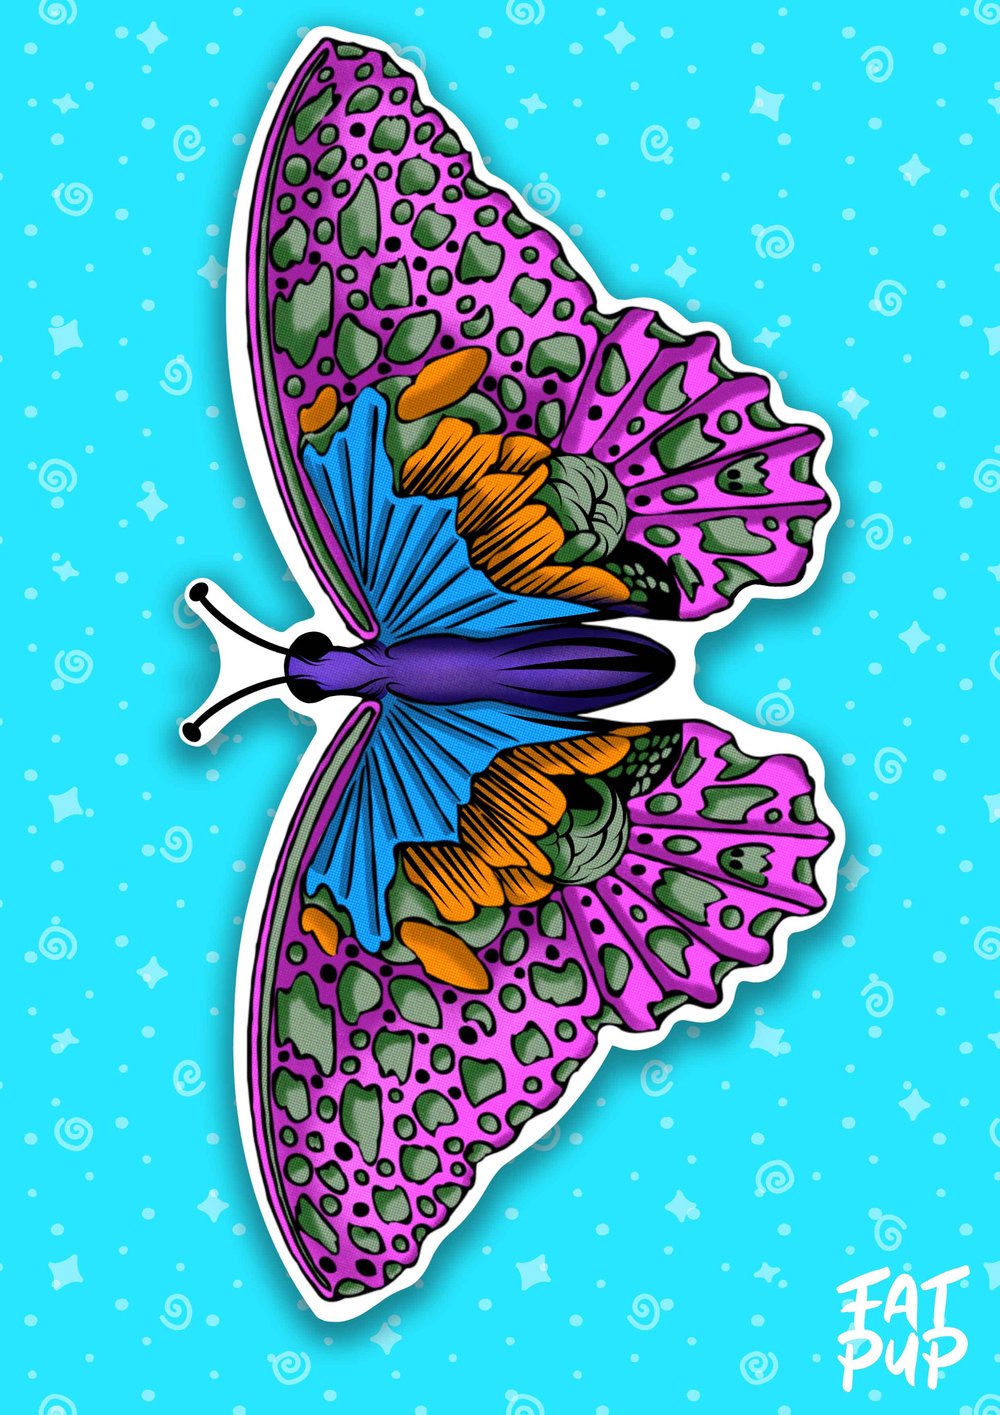 Butterfly No.2 Sticker — Fat Pup Illustration